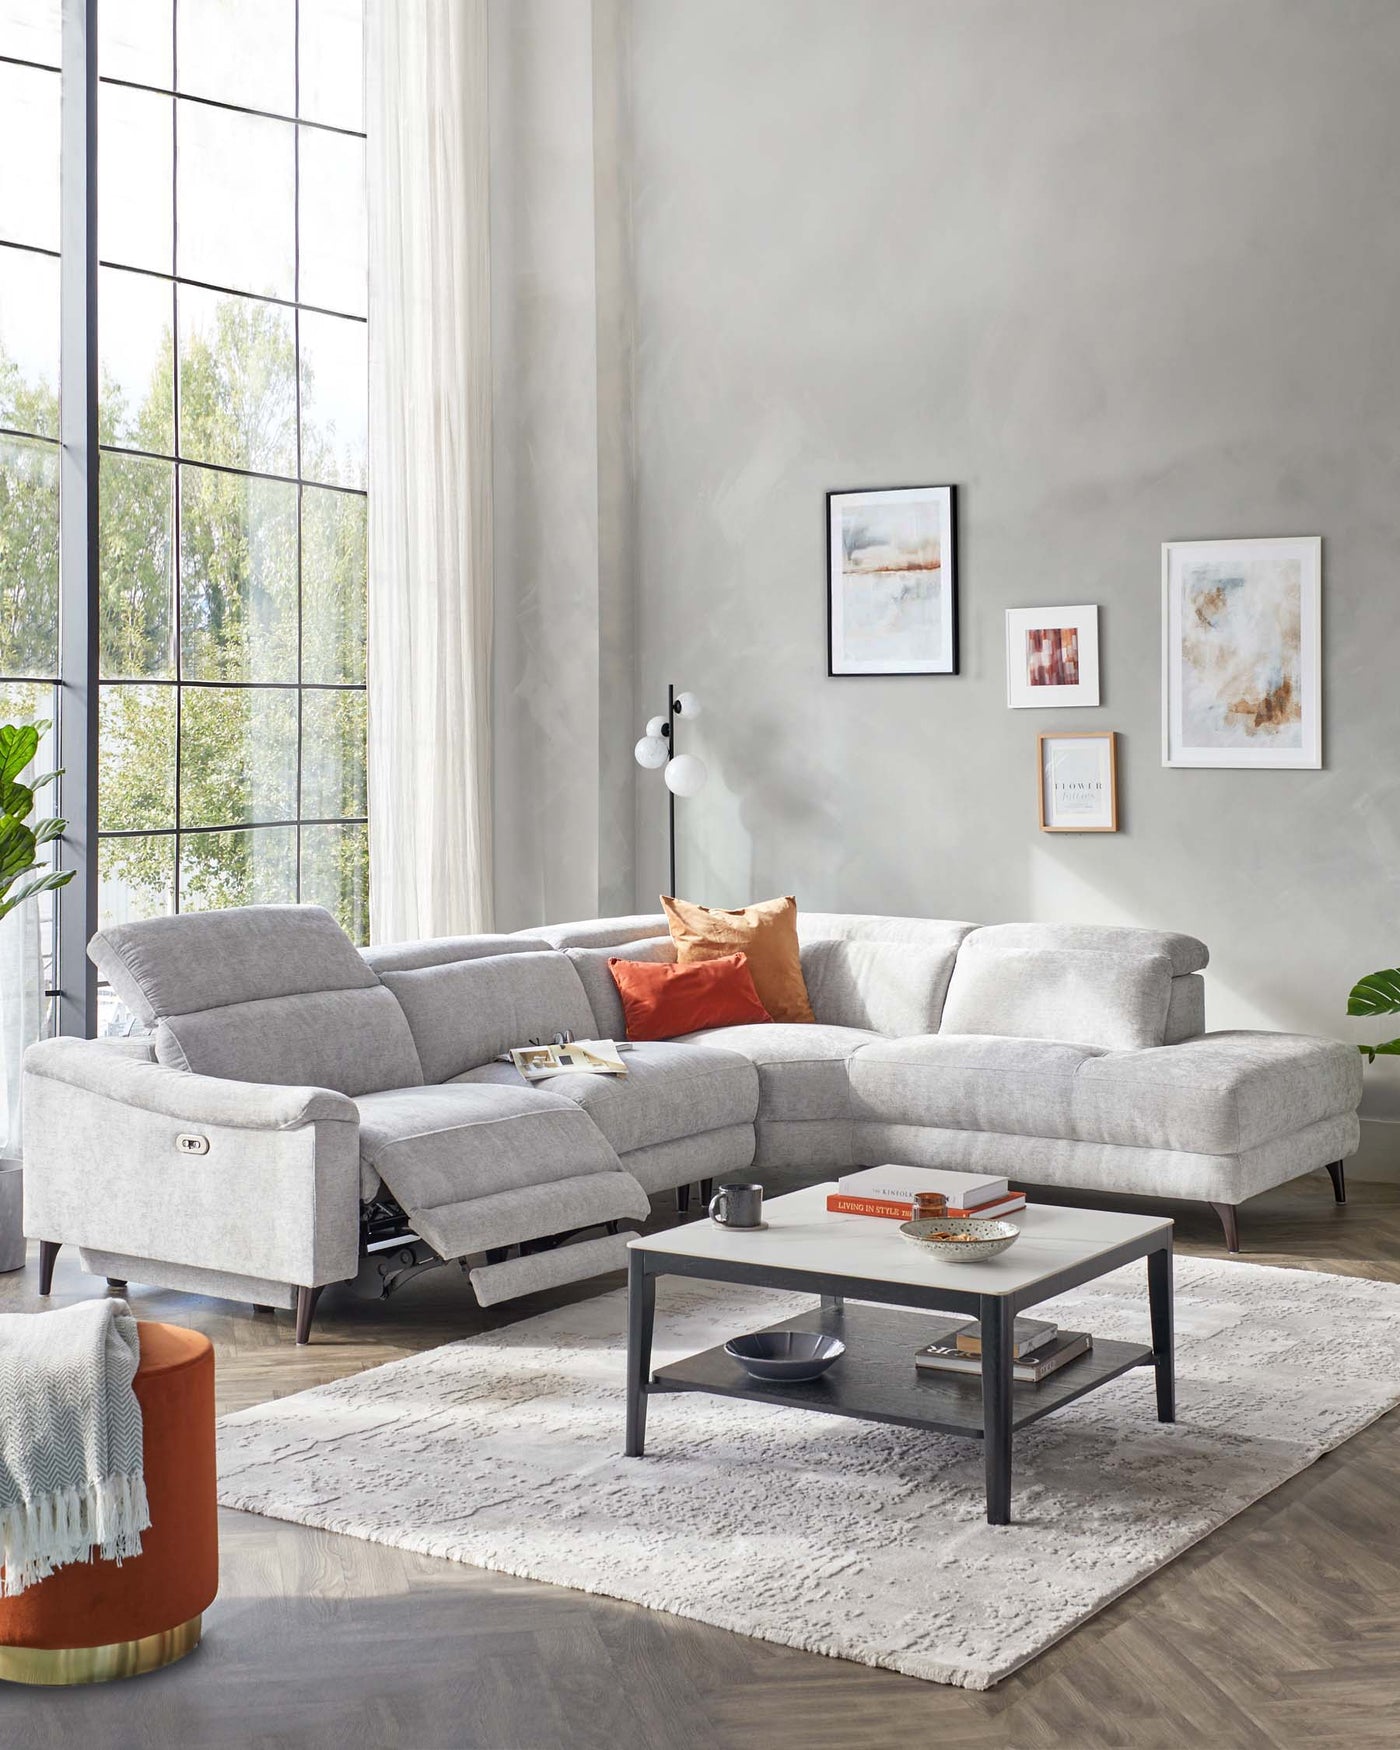 A modern living room featuring a light grey, L-shaped sectional sofa with plush cushions and contemporary metal legs. In the centre, a sleek, black rectangular coffee table with a glass top and shelf underneath sits on a textured off-white area rug. A round, burnt-orange side table with a gold-coloured base adds a pop of colour and complements the throw pillows on the couch.